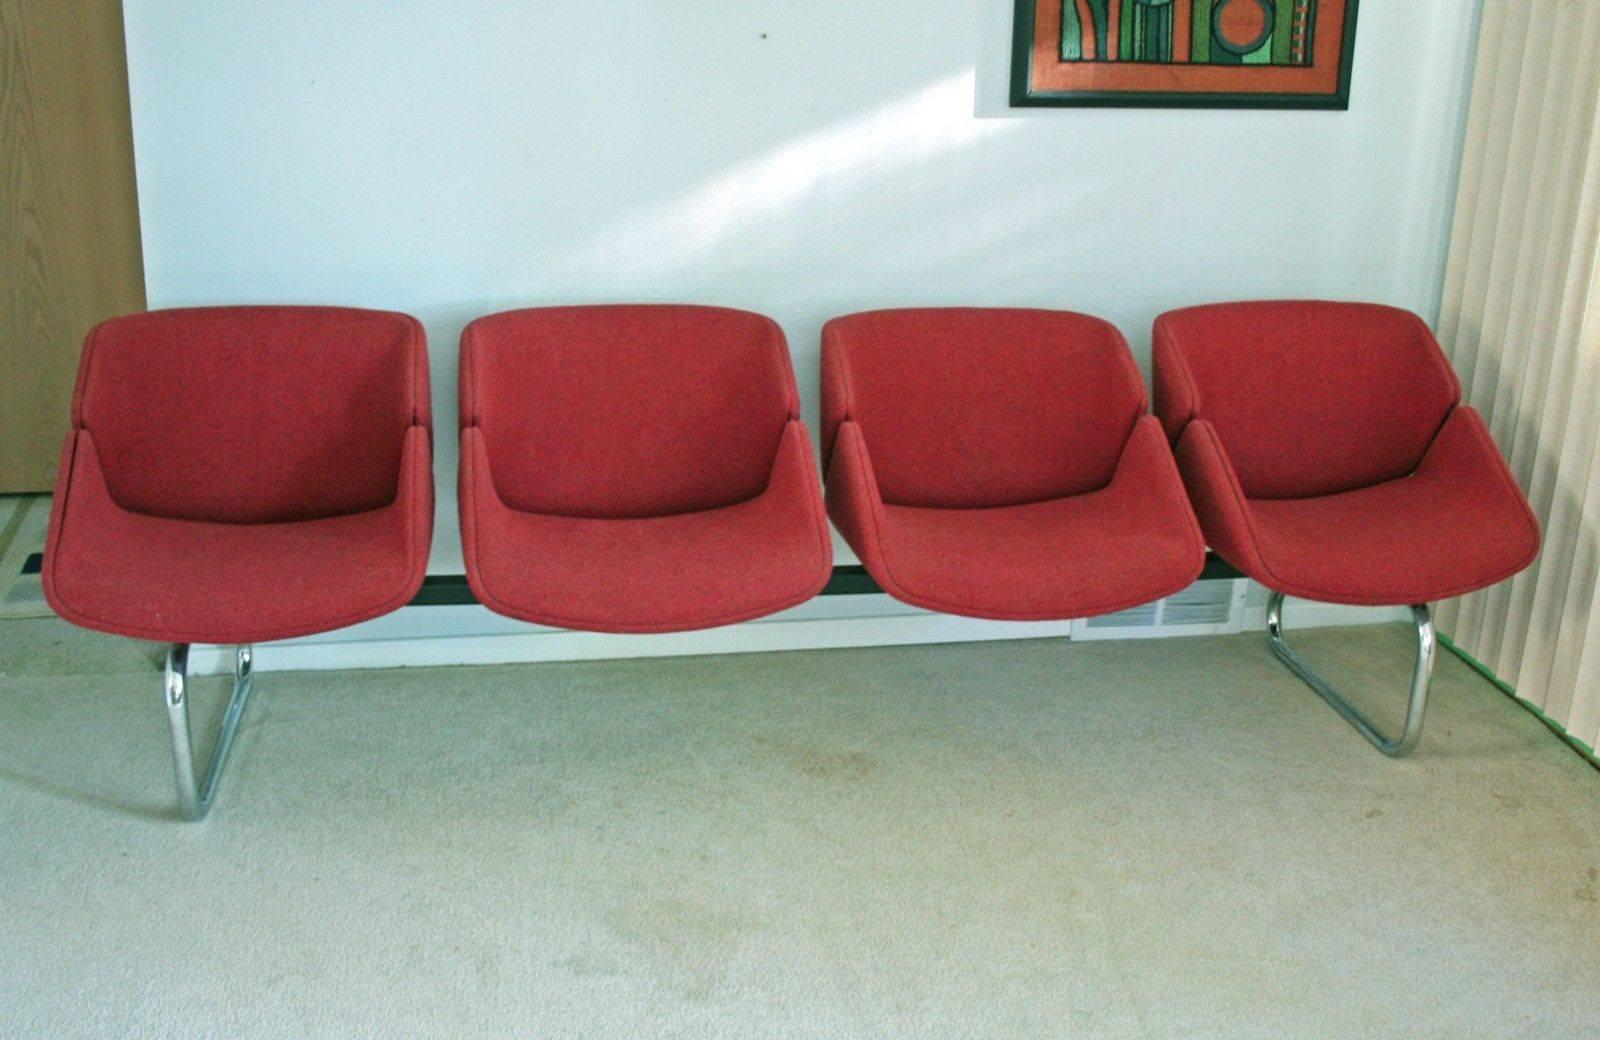 Vintage original Thonet tandem bench with four chairs. Of note: color is more of a soft brick red - not the bright red seen in lead photo. The second sidebar photo (straight on front view) shows reasonably accurate color. Very